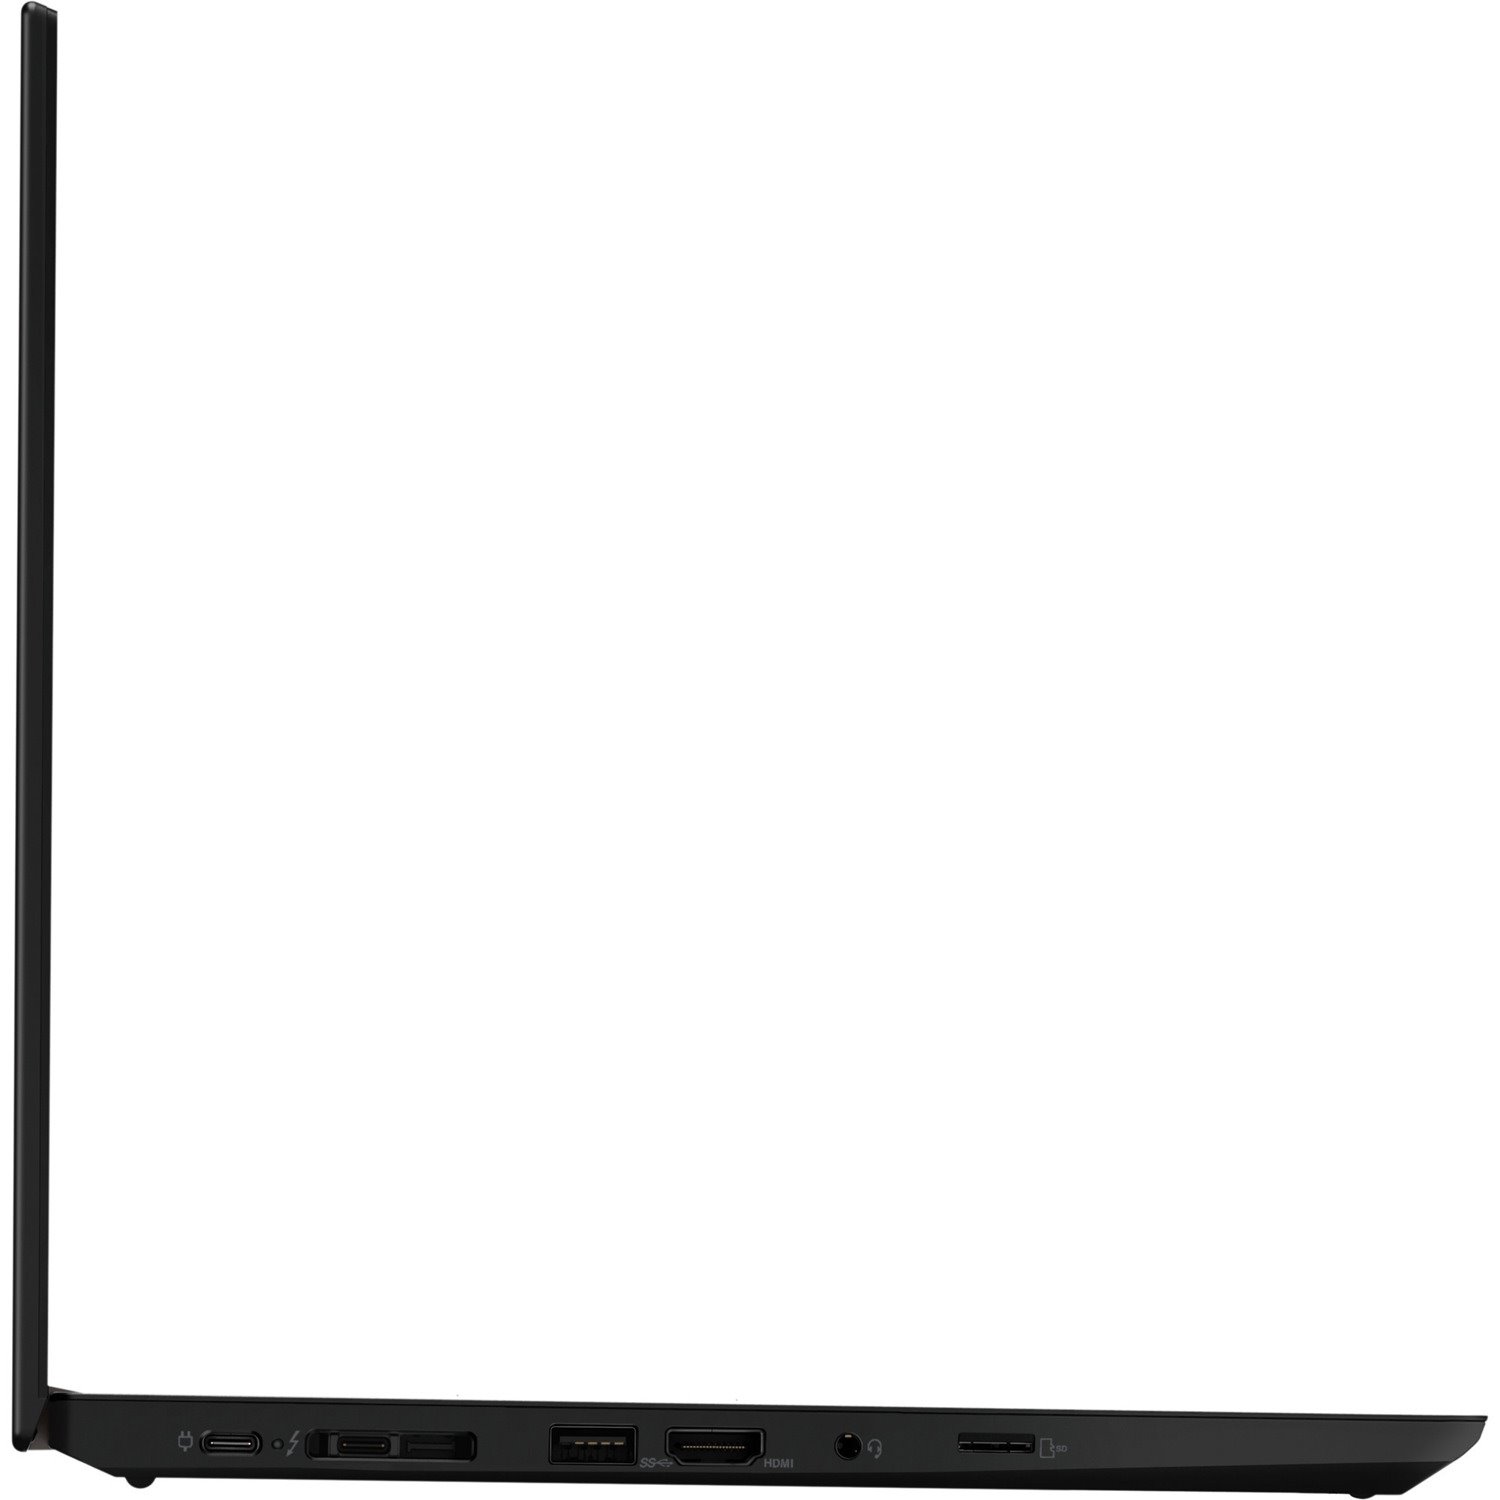 Lenovo ThinkPad T14 Gen 2 20W000T2US 14" Notebook - Full HD - 1920 x 1080 - Intel Core i5 11th Gen i5-1135G7 Quad-core (4 Core) 2.4GHz - 16GB Total RAM - 512GB SSD - no ethernet port - not compatible with mechanical docking stations